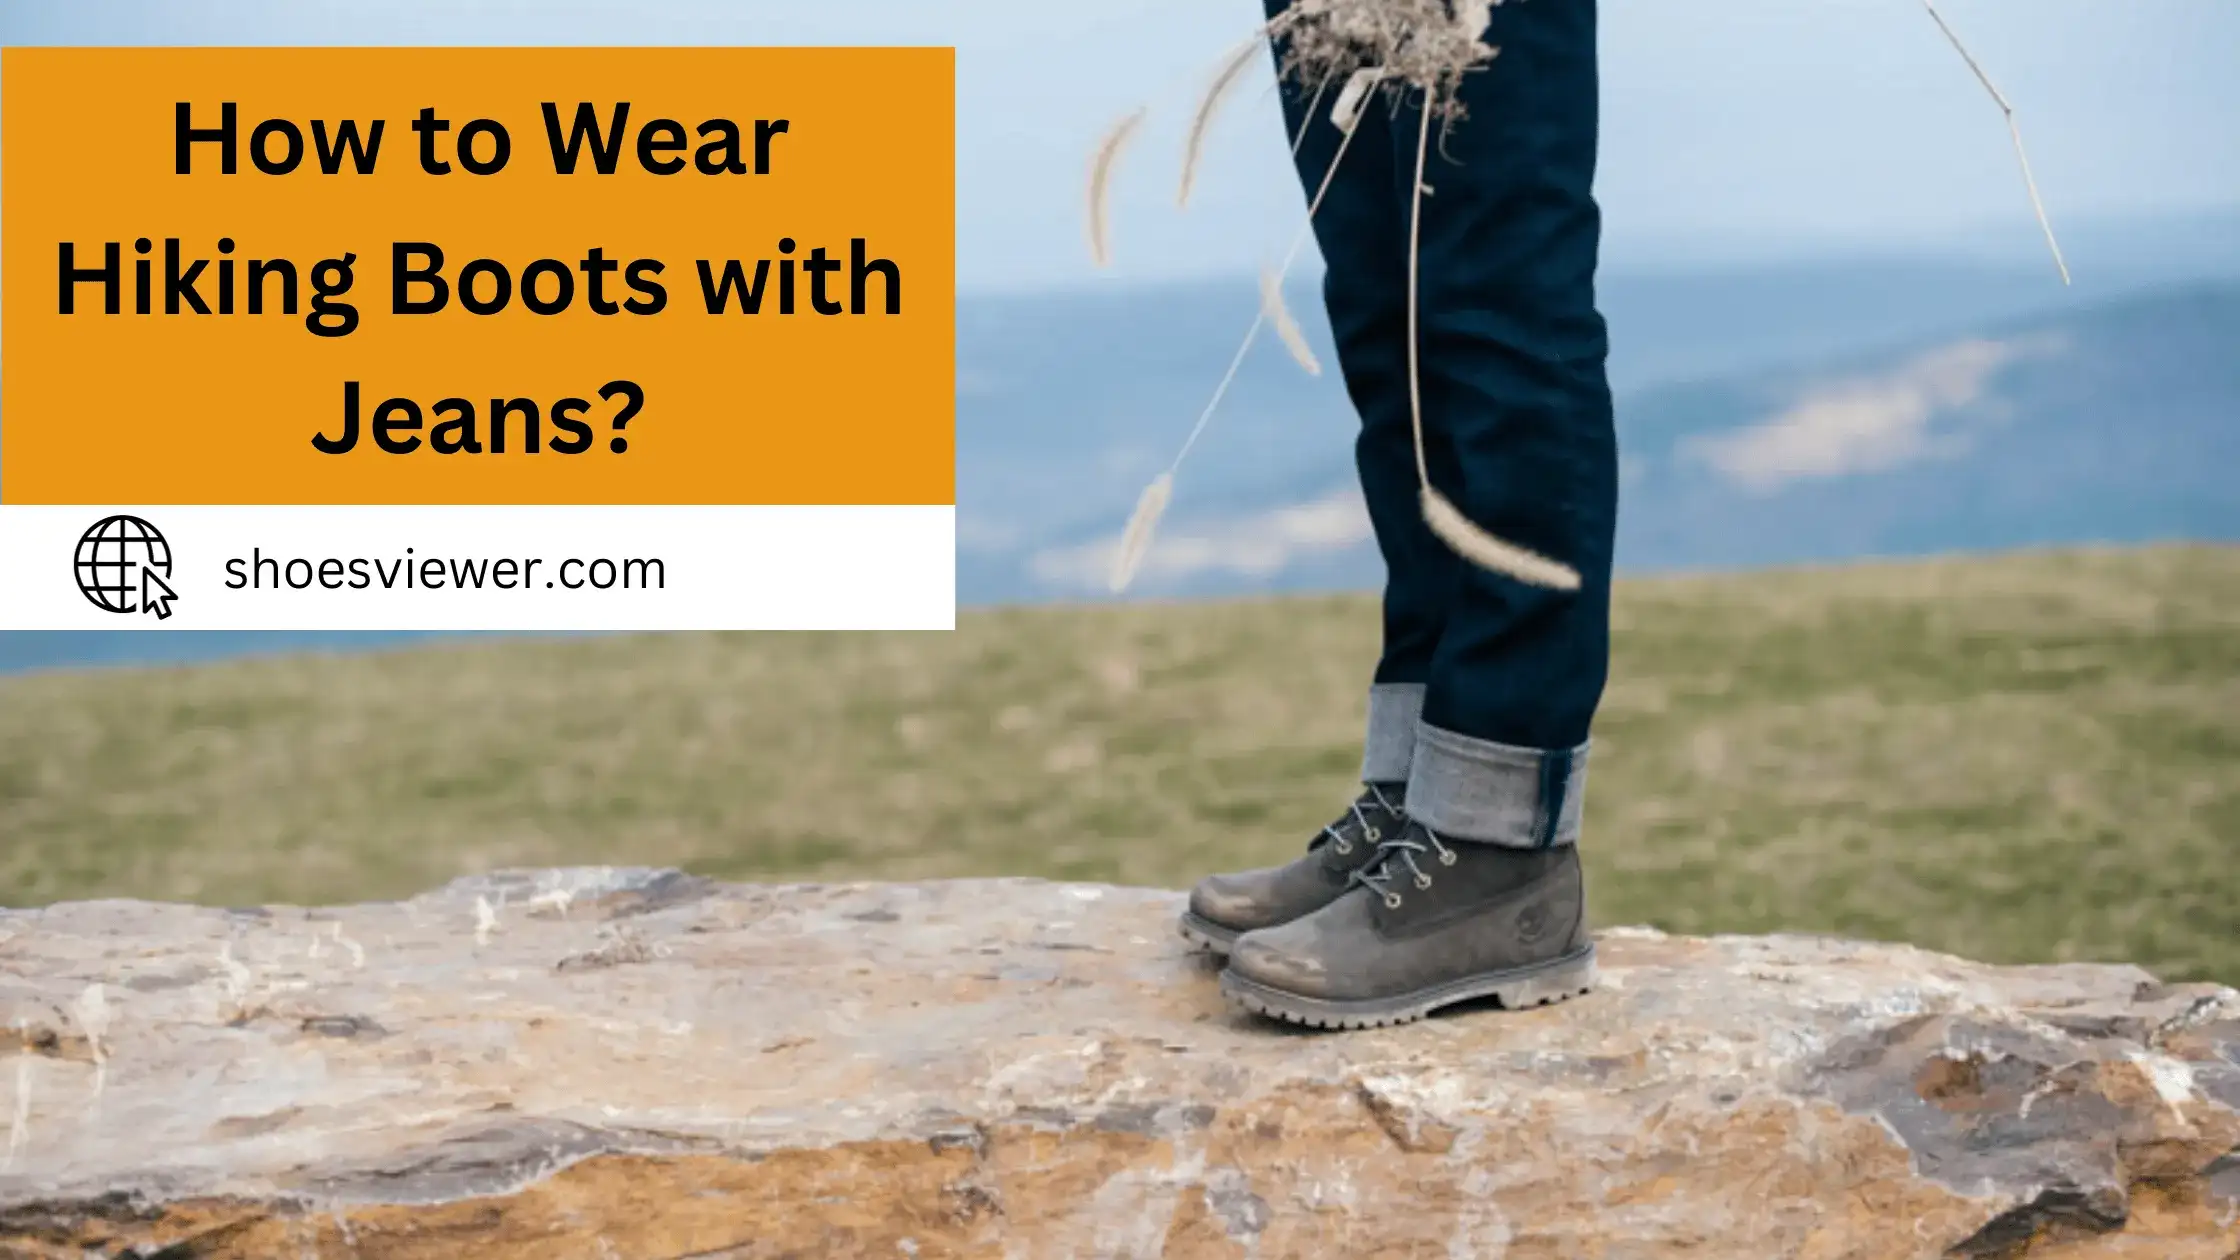 How To Wear Hiking Boots With Jeans? Latest Guide